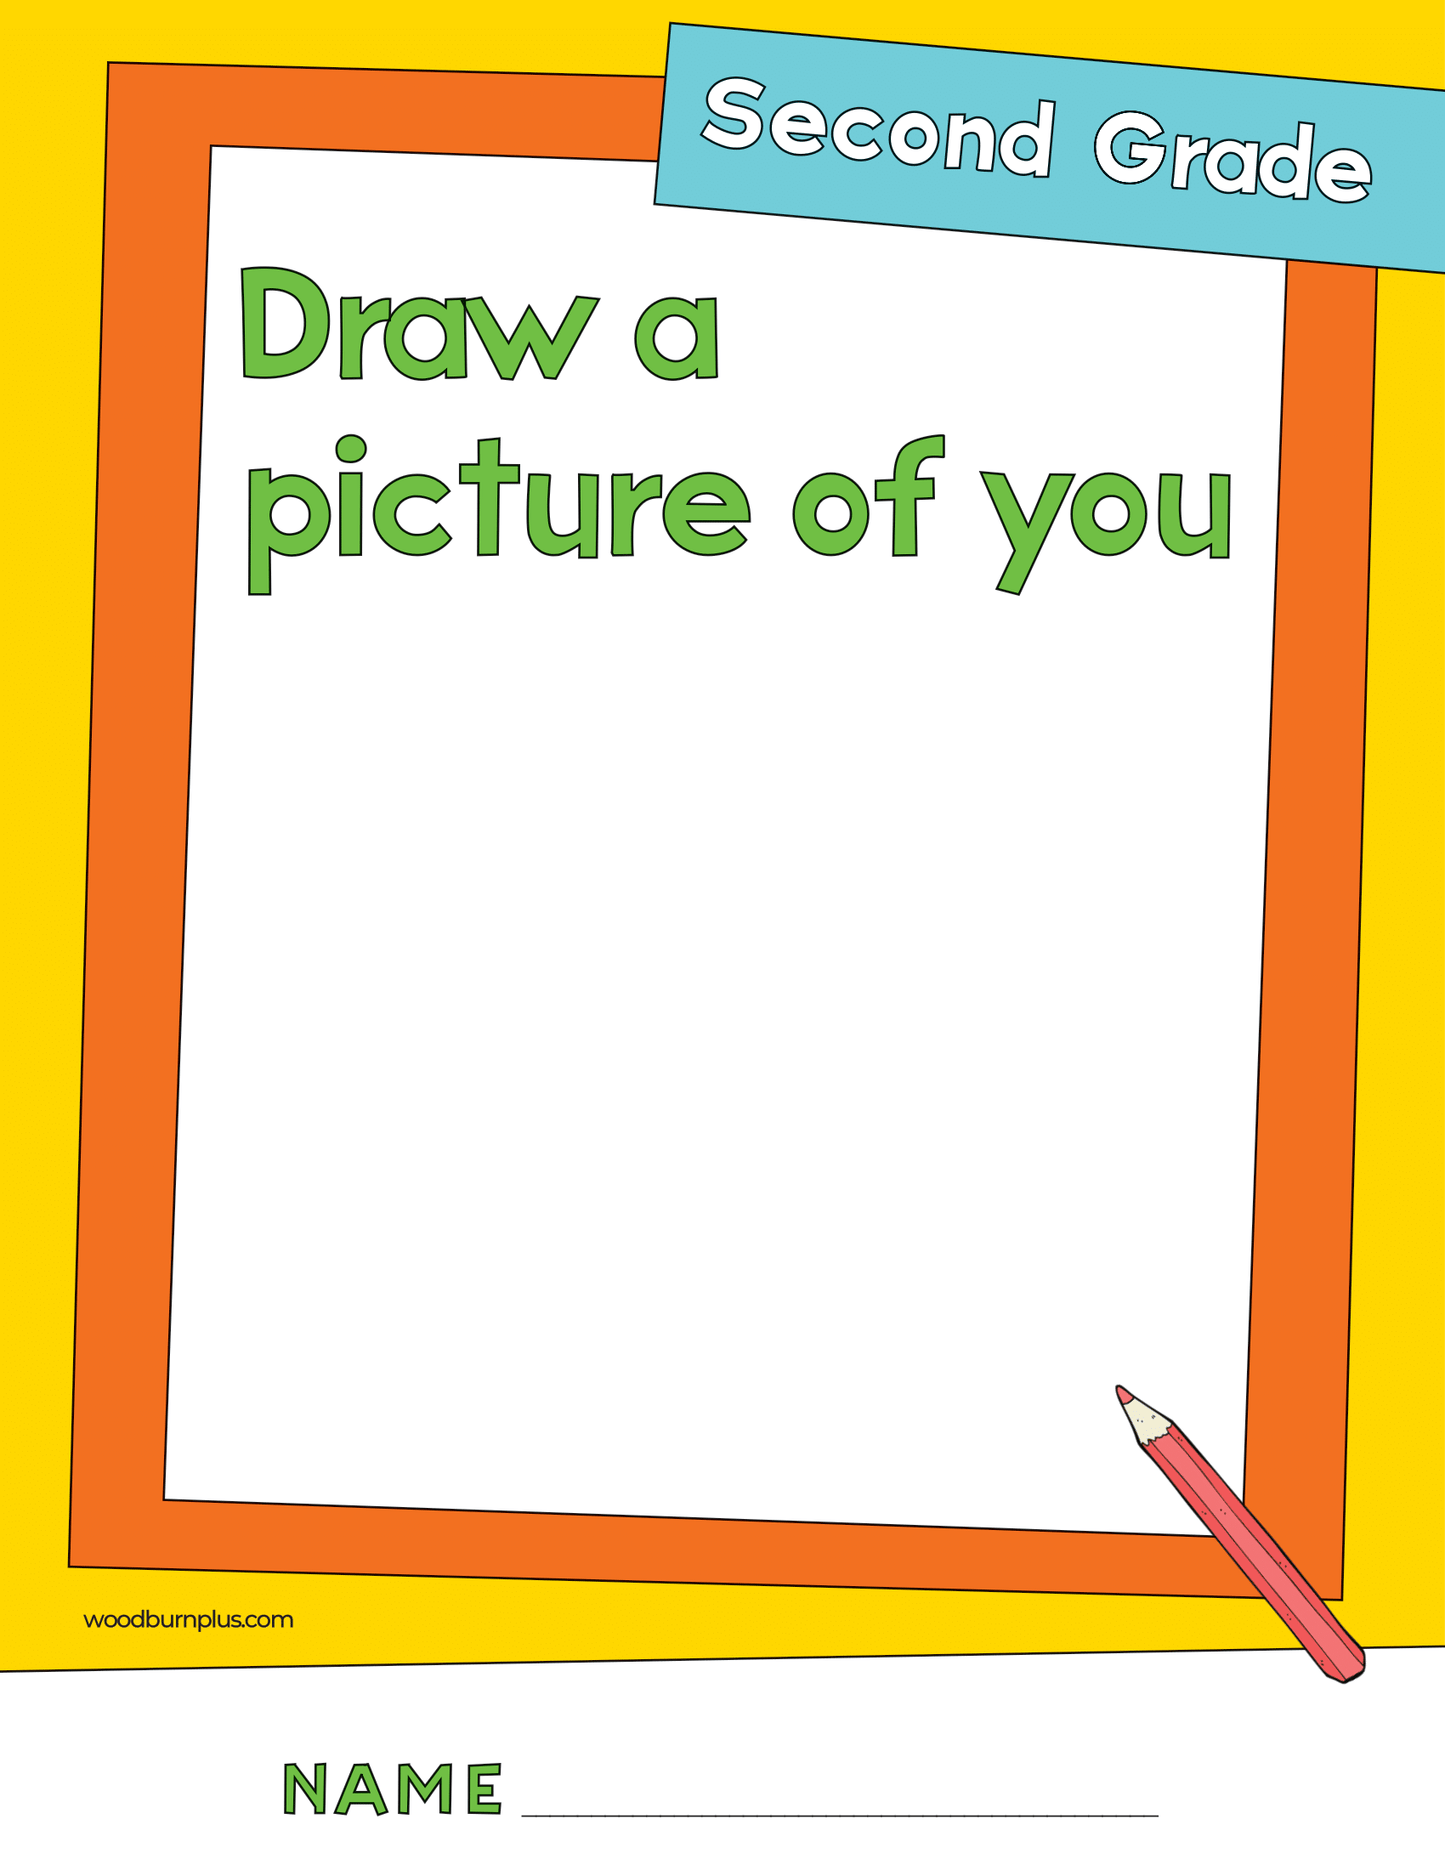 Second Grade - Draw a Picture of You